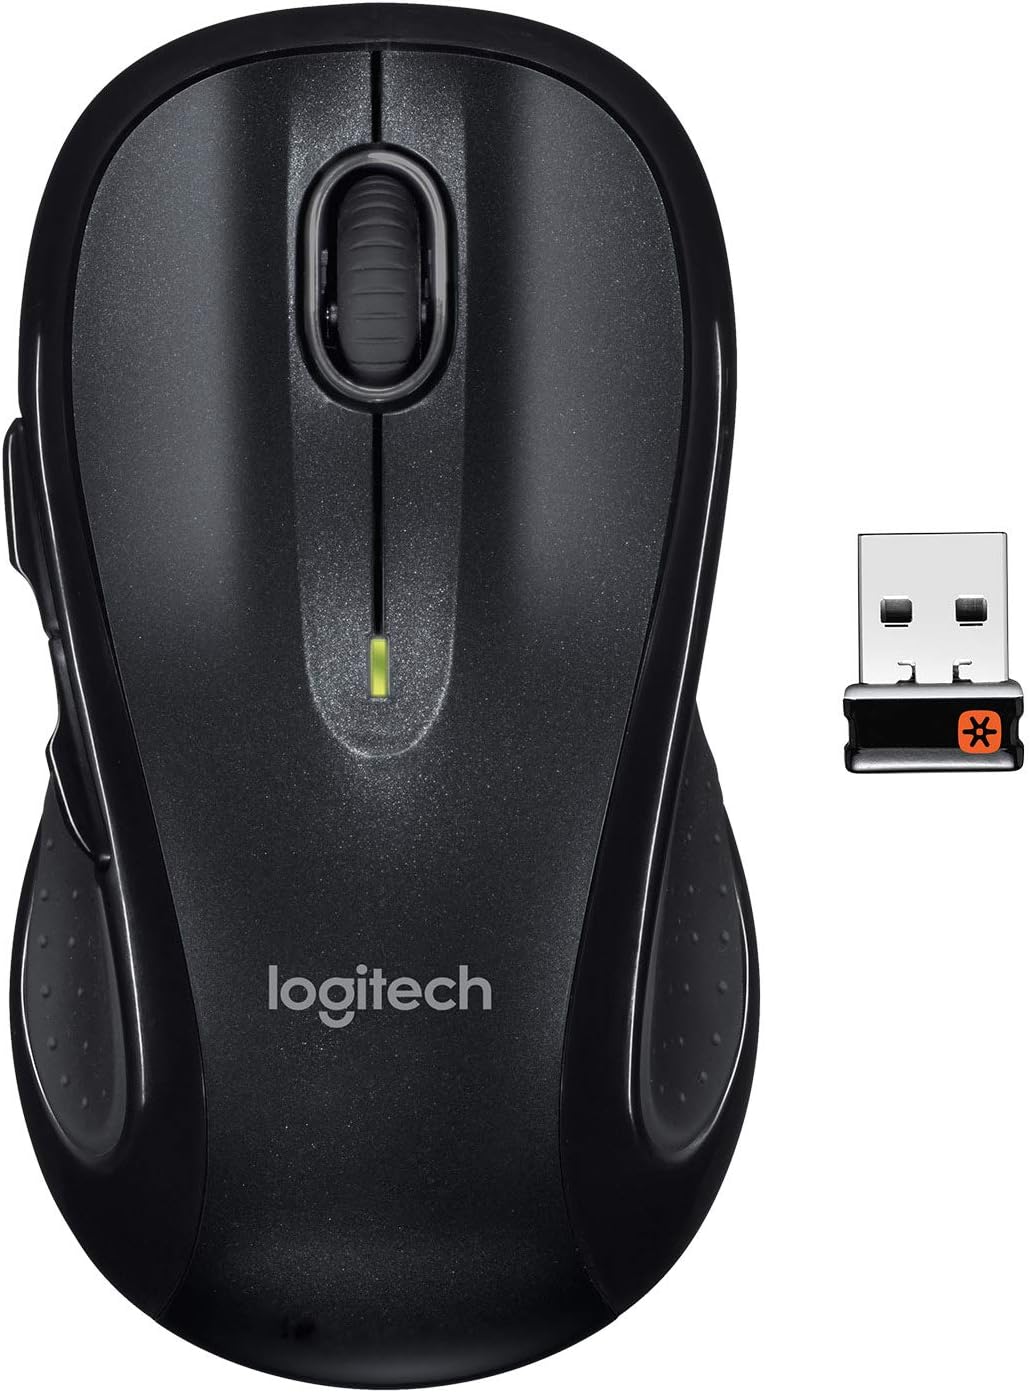 Review of Logitech M510 Wireless Computer Mouse